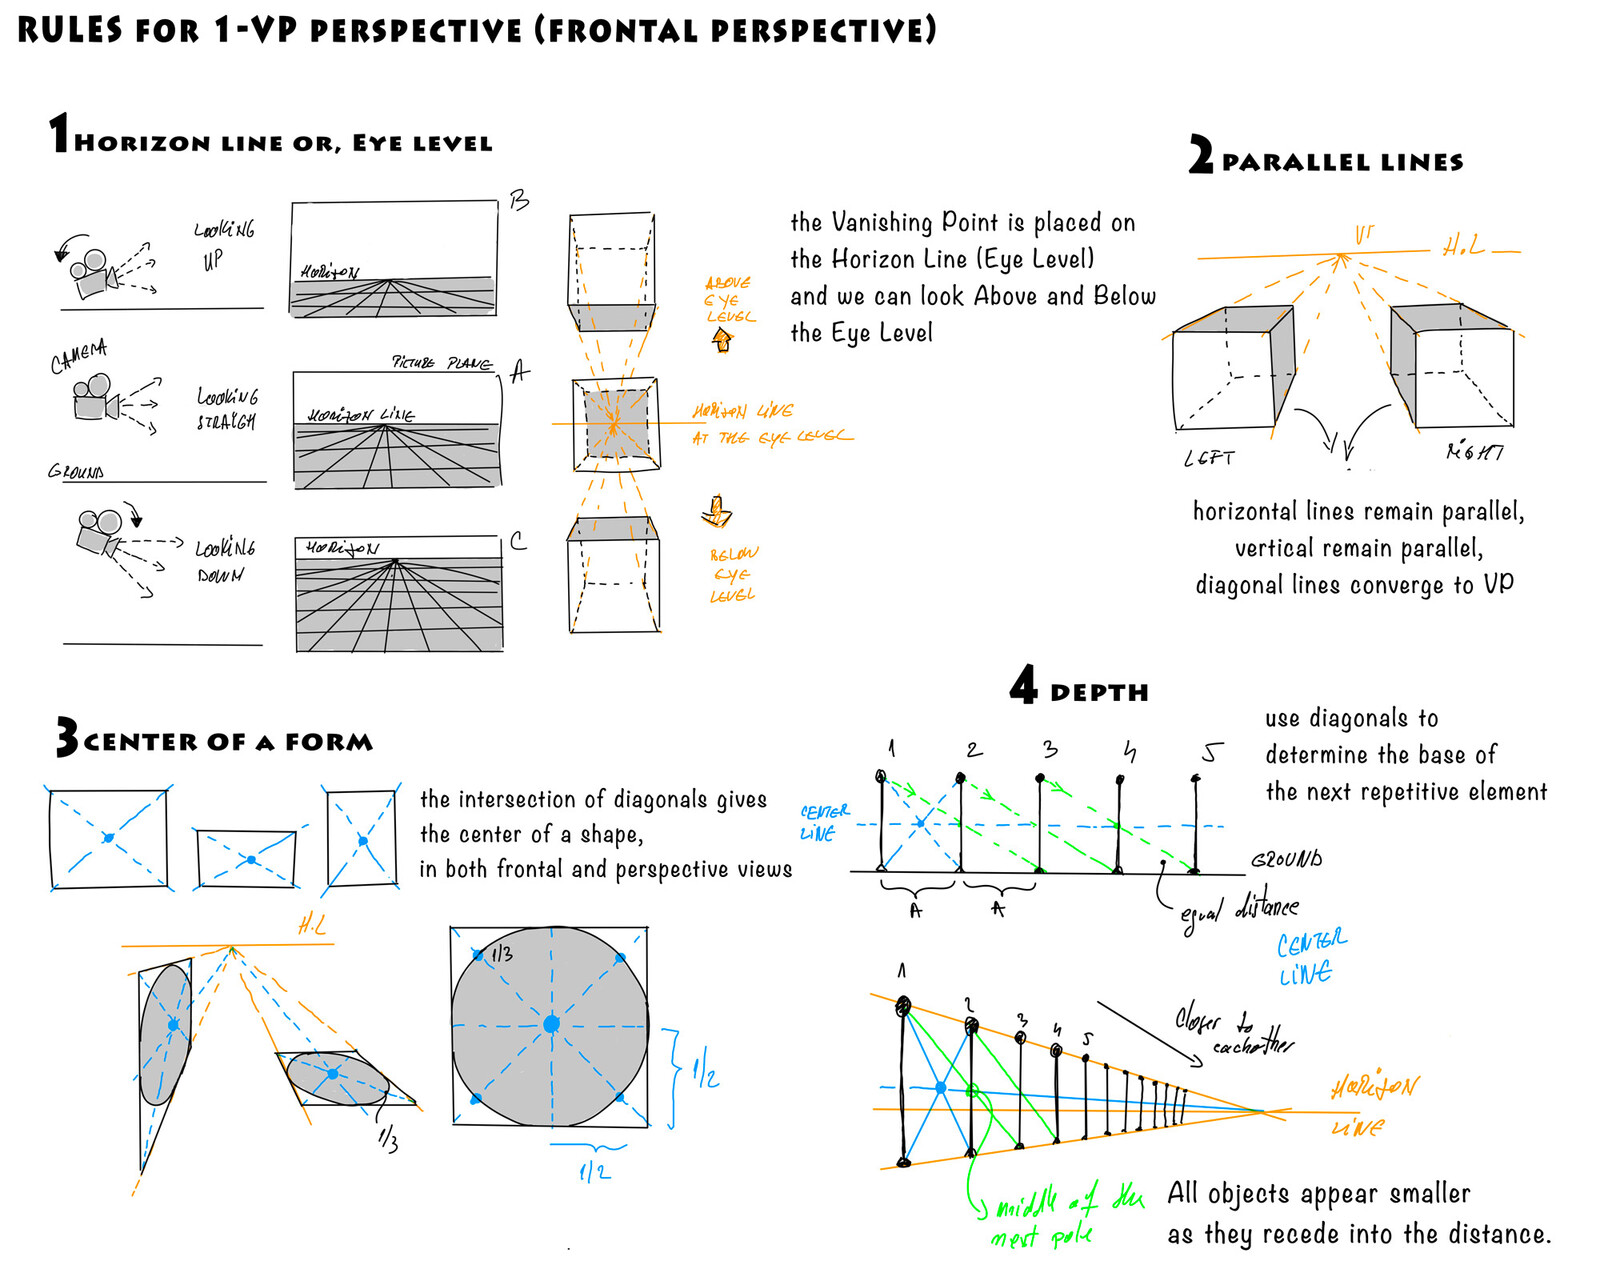 One-point perspective represents a three-dimensional drawing that creates the illusion of depth as a direct frontal view. All objects appear smaller and closer to each other as they recede into the distance.